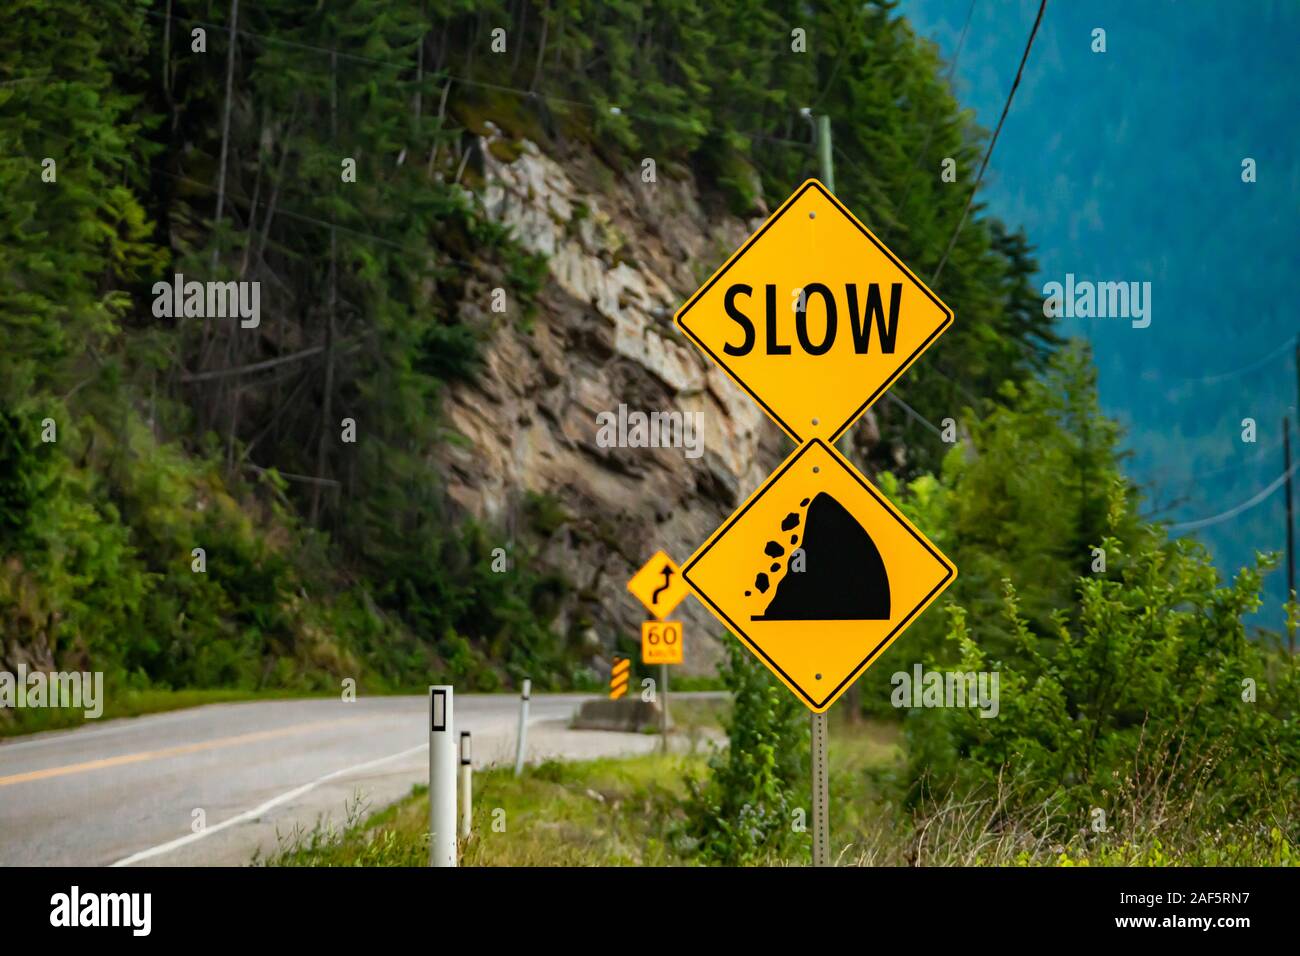 slow, Watch for fallen rock and be prepared to avoid a collision, Warning yellow roads signs in selective focus view with rocky slope background Stock Photo